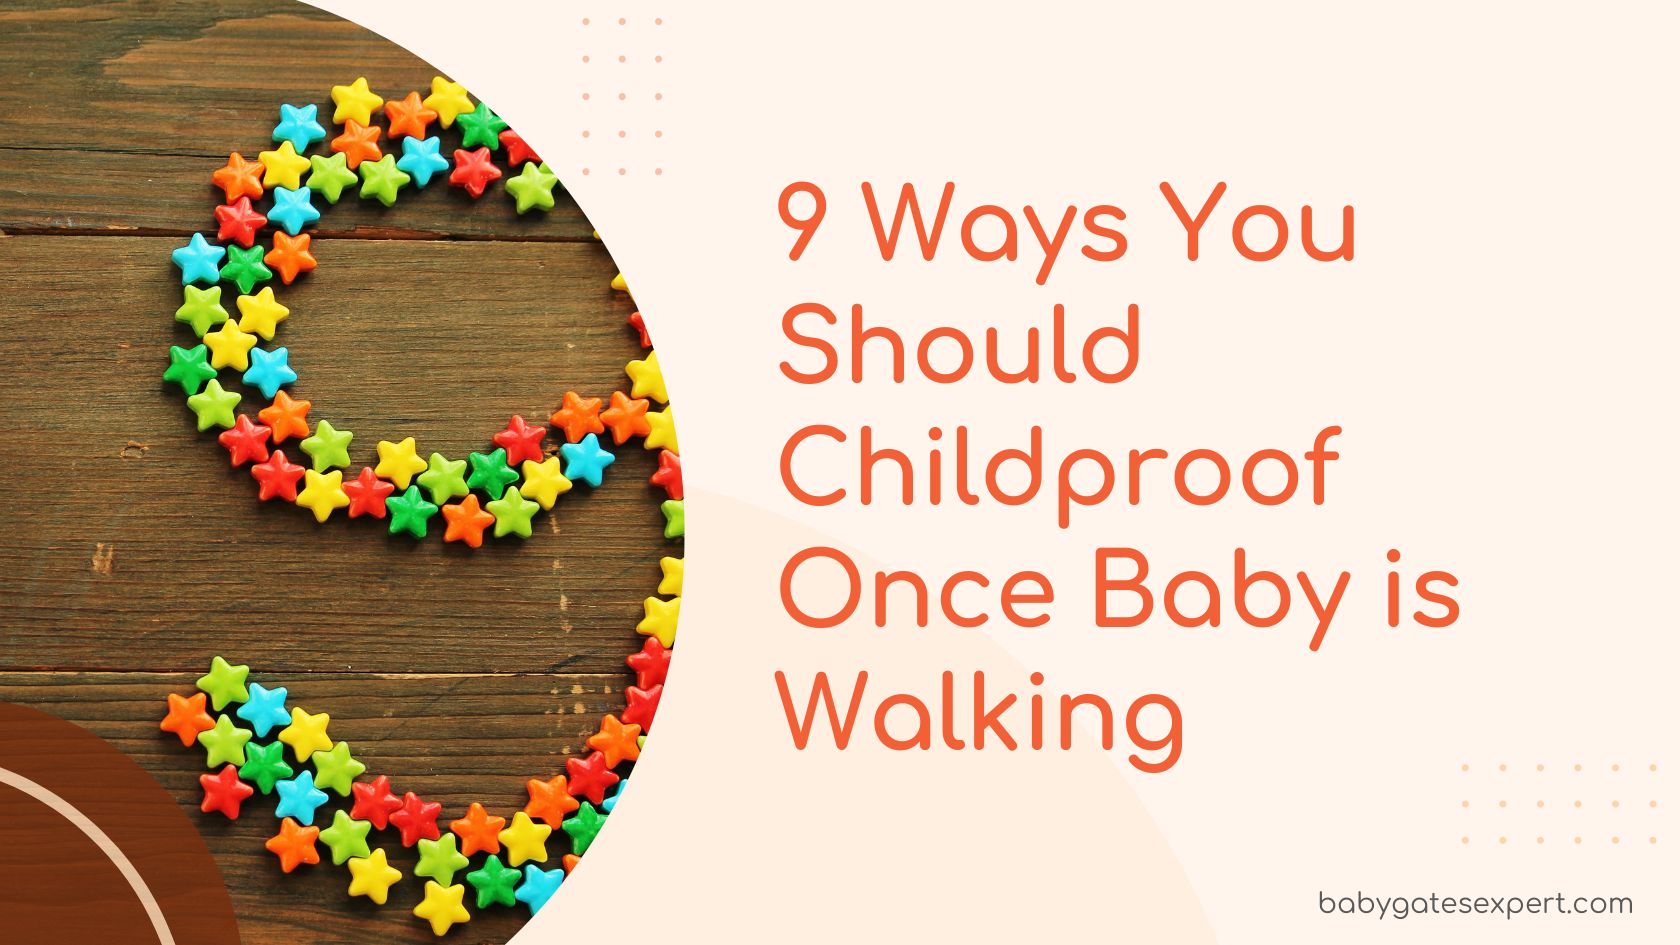 9 Ways You Should Childproof Once Baby is Walking